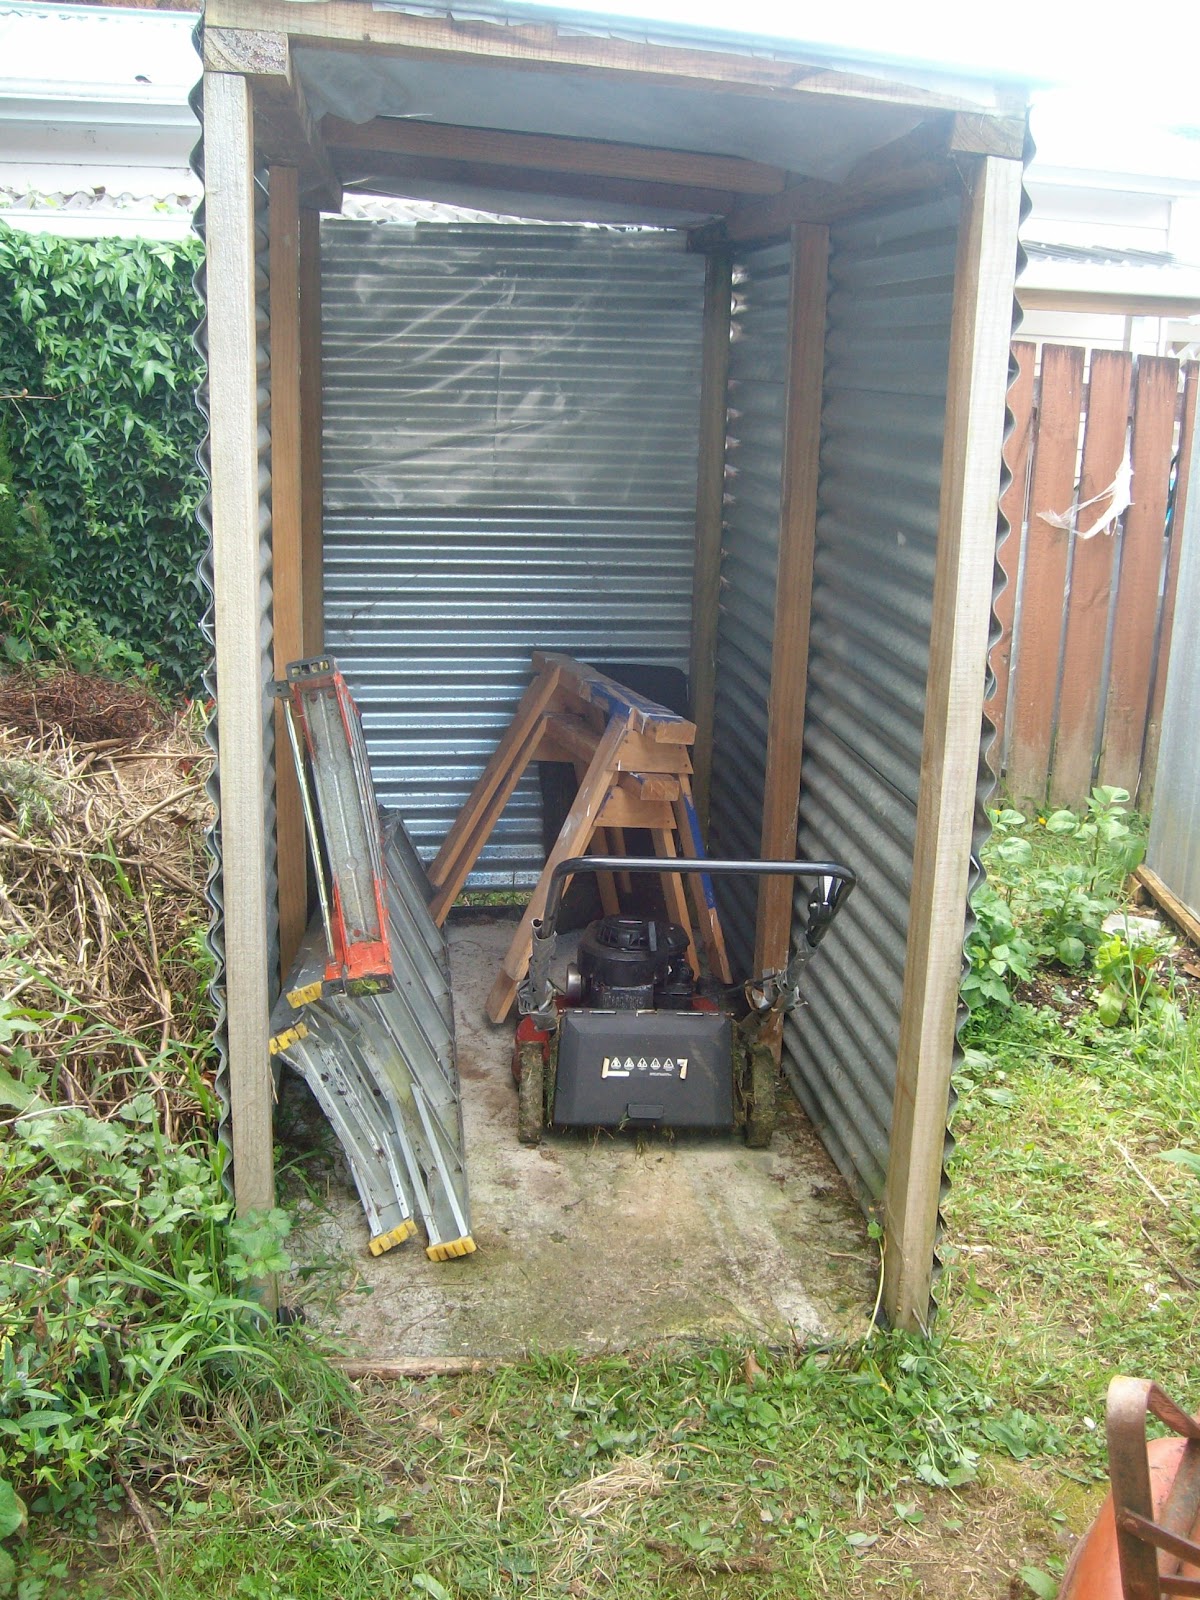  was this motorbike that caused my dilema. I'd built this shed for it